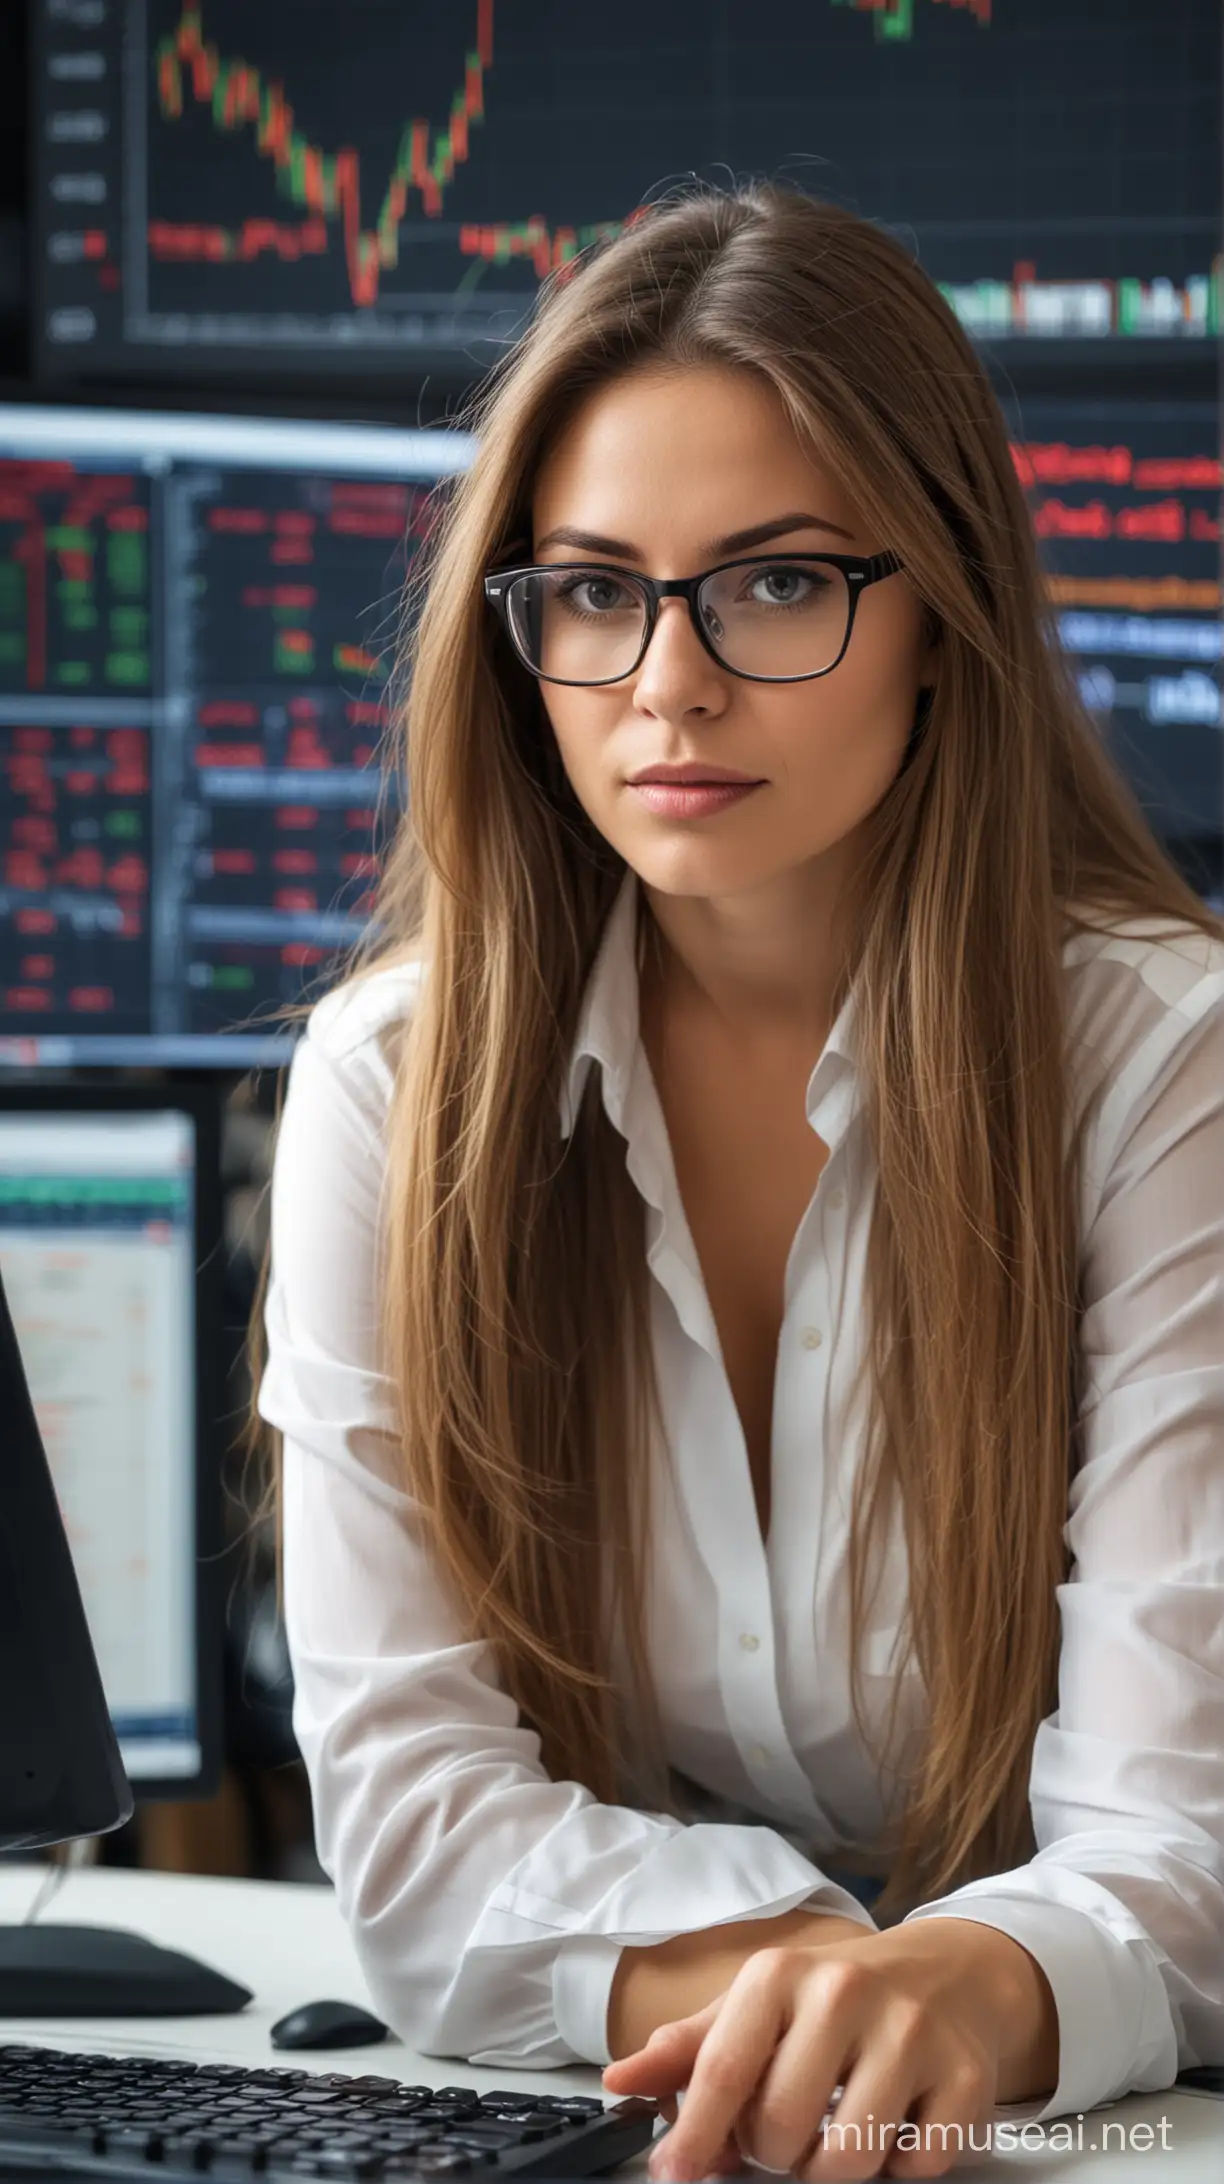 Female Trader Analyzing Financial Markets on Computer with Glasses and Long Hair